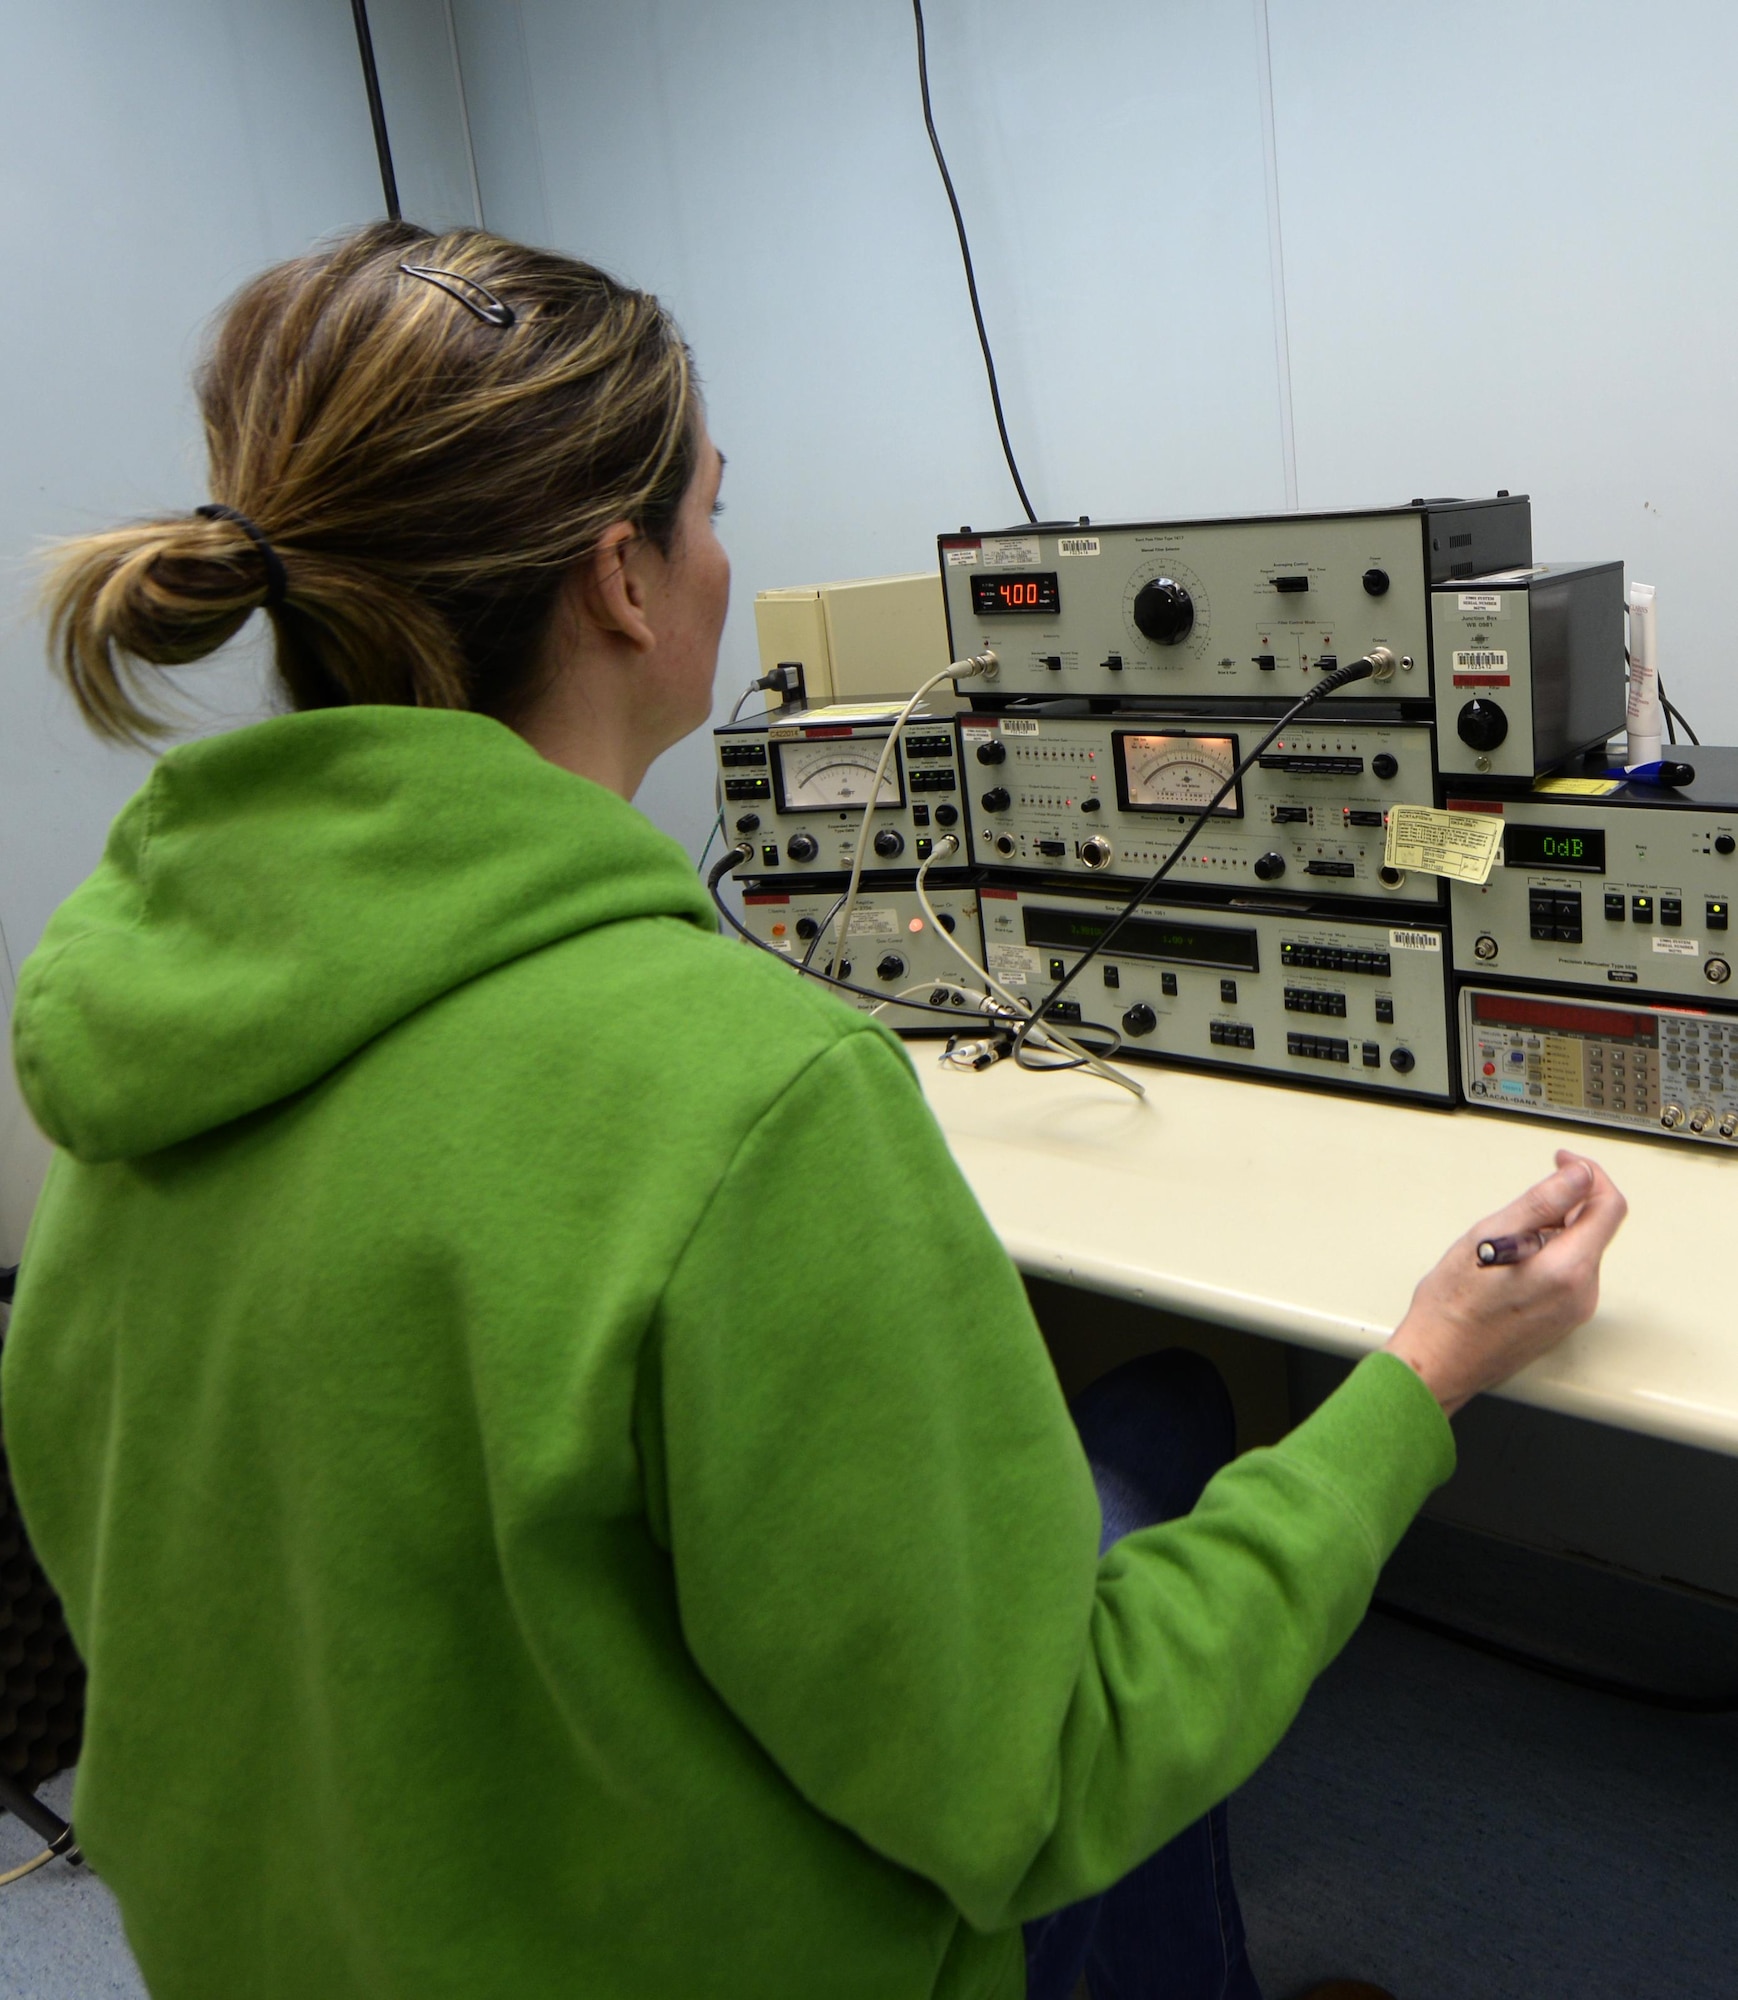 Elizabeth Maschmeyer, 3rd Maintenance Squadron Precision Measurement Equipment Laboratory calibration technician, calibrates a sound system at Joint Base Elmendorf-Richardson, Alaska, Oct. 23, 2017. Technicians from the 3rd MXS PMEL can calibrate and repair Test Measurement and Diagnostic Equipment to accuracies ranging from millionths of an inch to microvolts, depending upon the measurement area. They do so with four criteria in mind: accuracy, reliability, traceability and safety. (U.S. Air Force photo/Senior Airman Curt Beach)